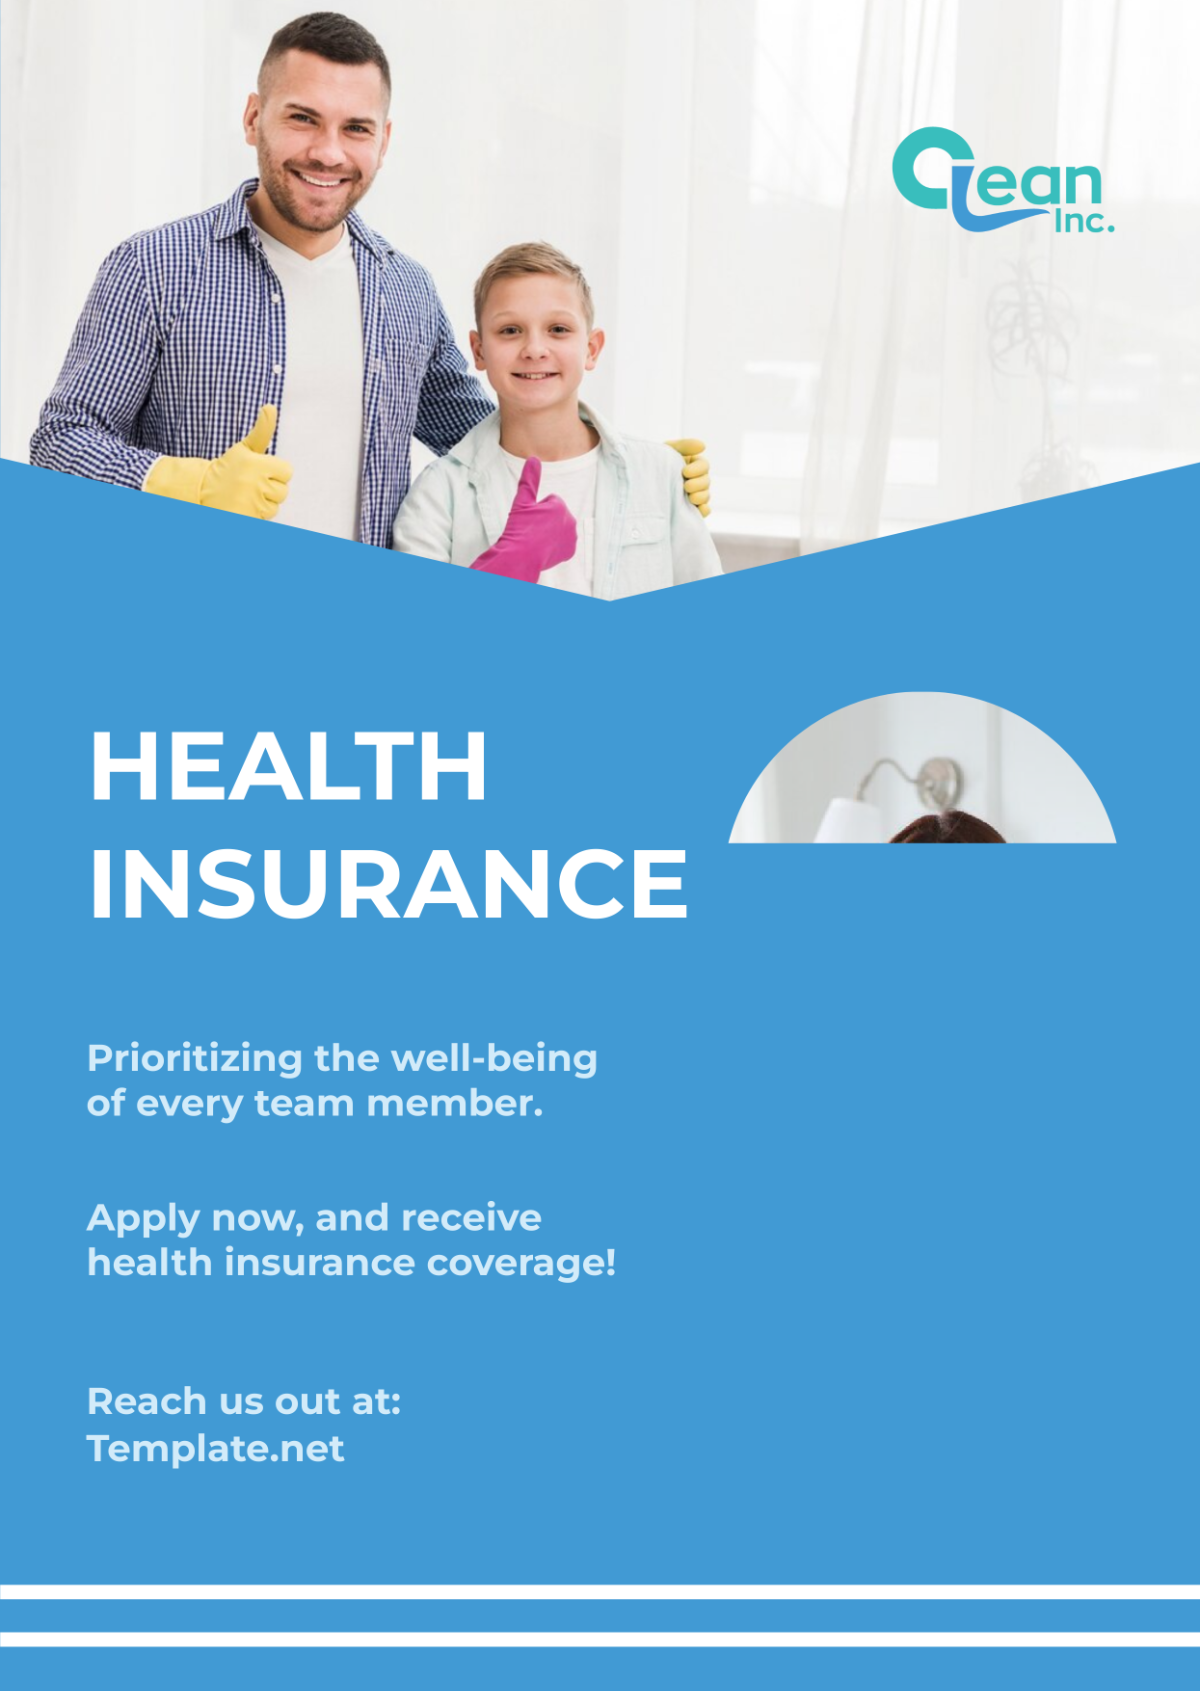 Cleaning Services Health Insurance Ad